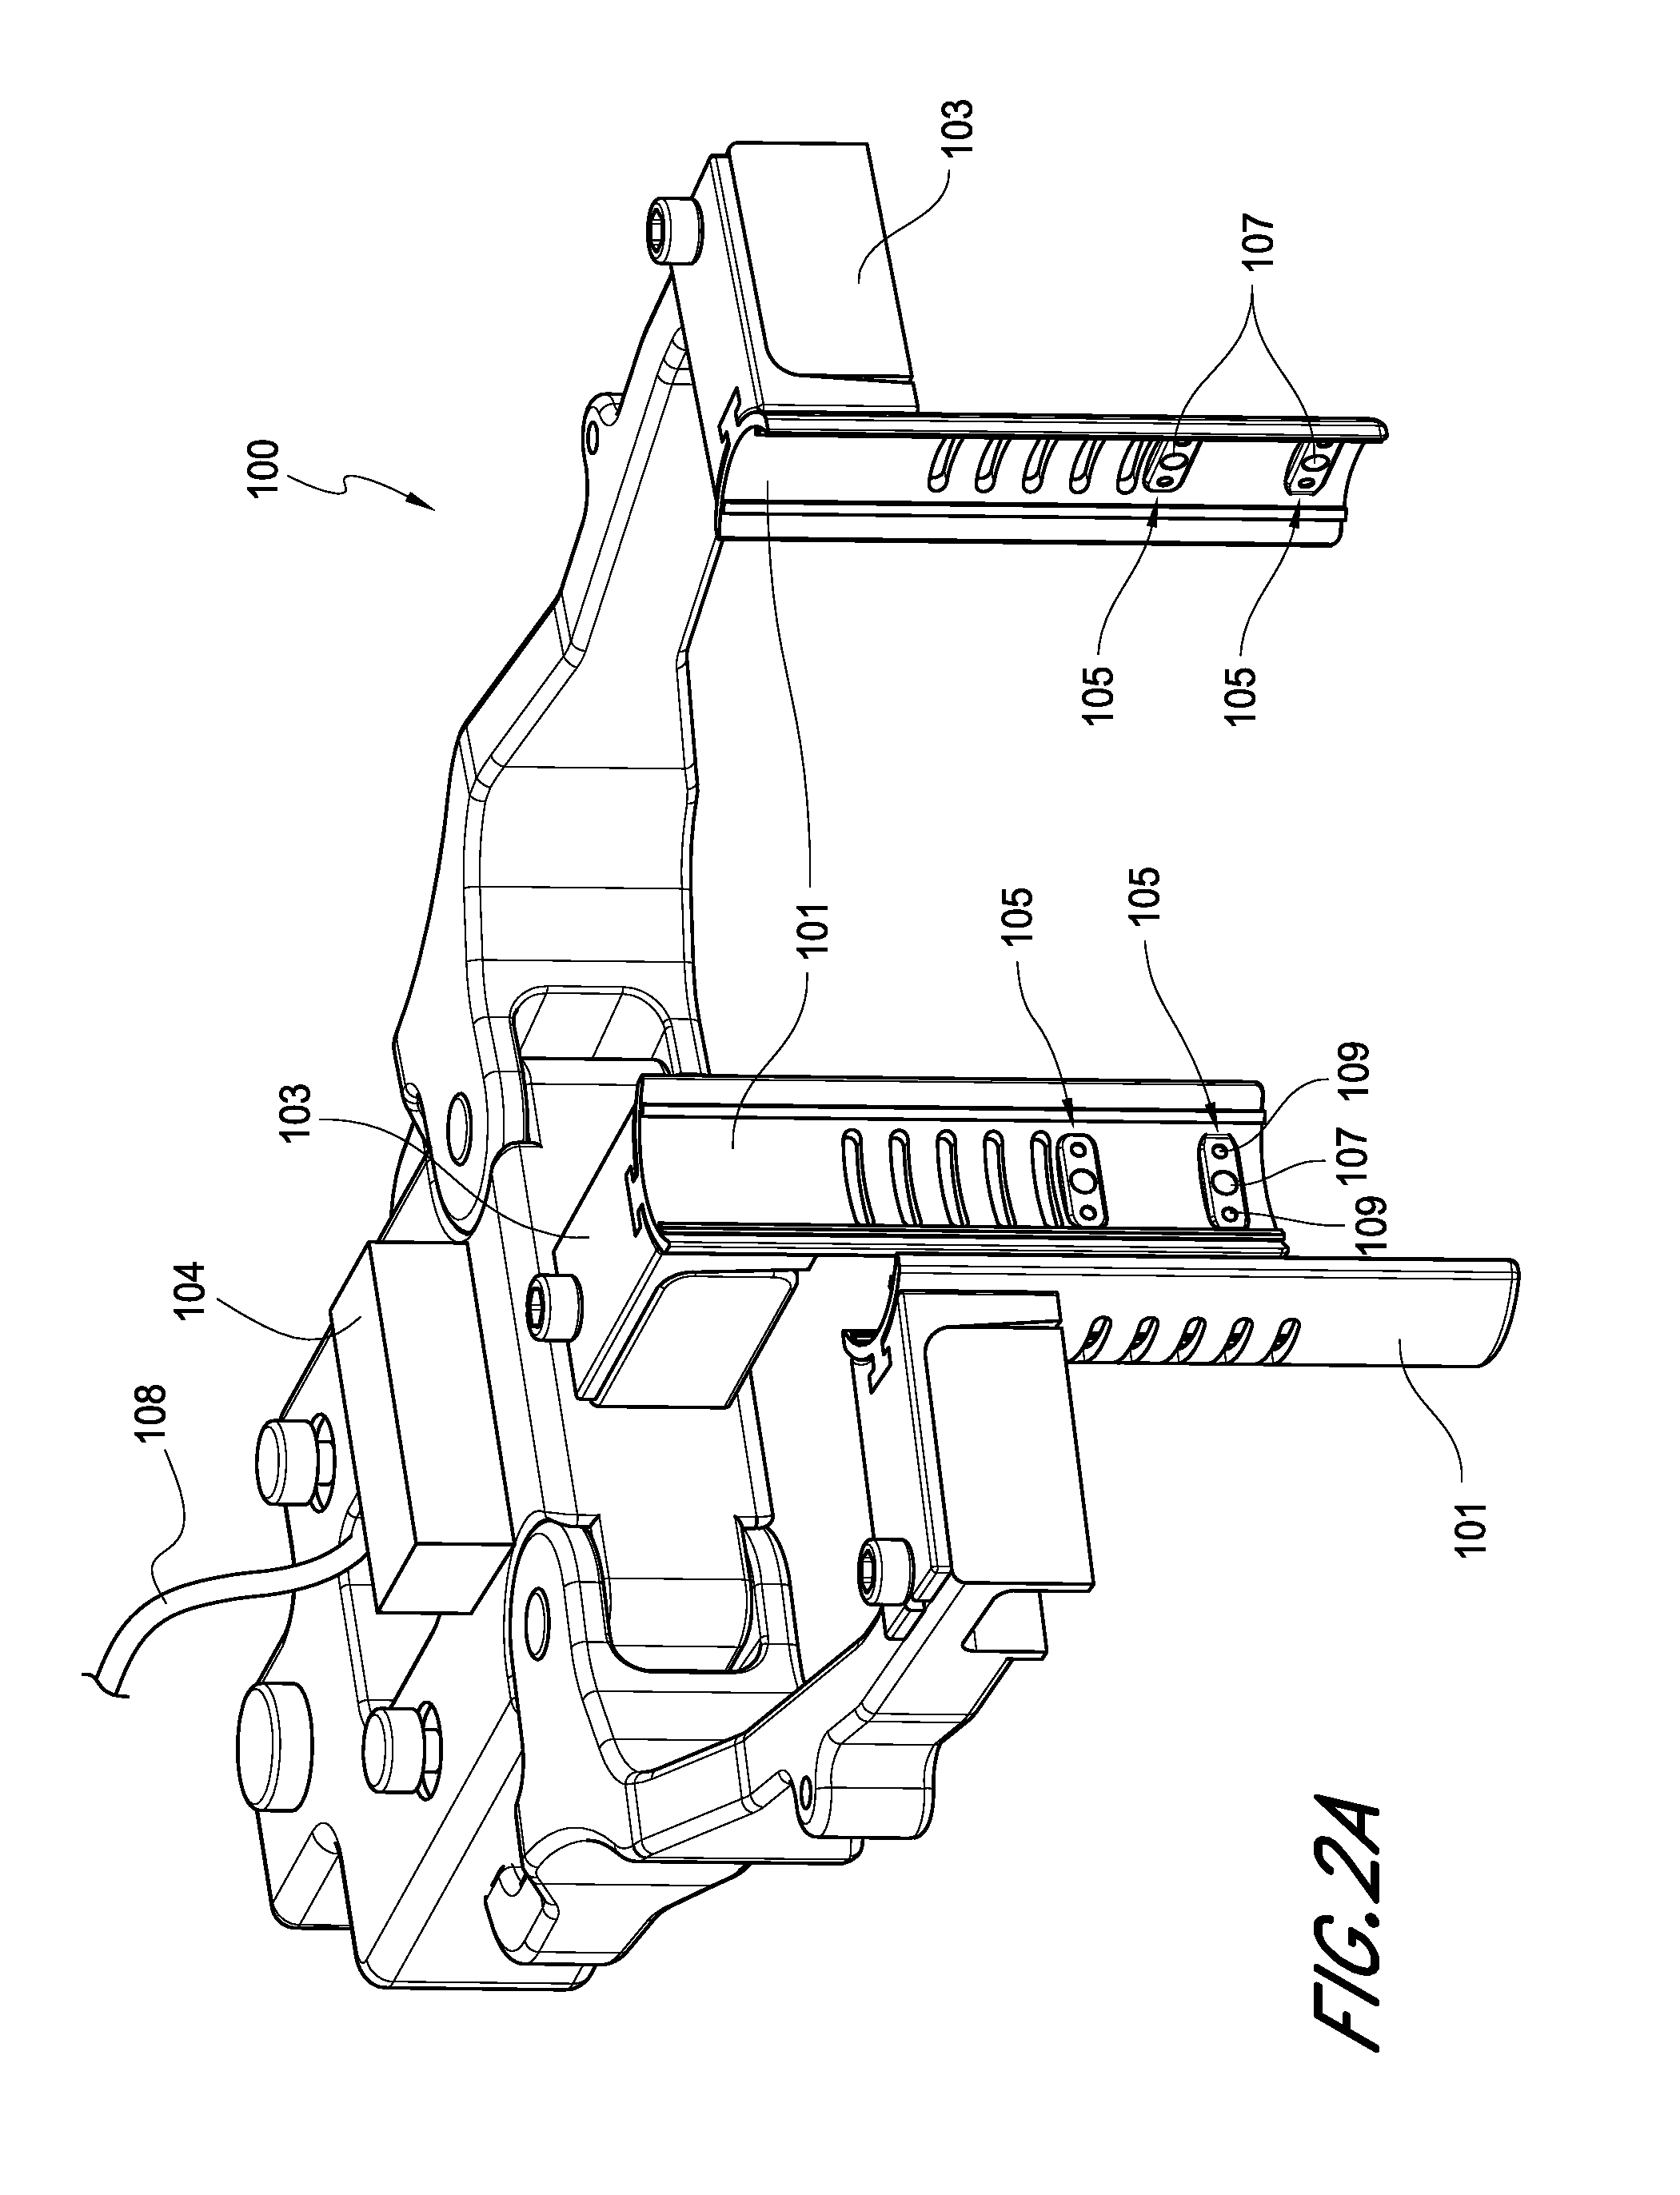 Optical assembly providing a surgical microscope view for a surgical visualization system